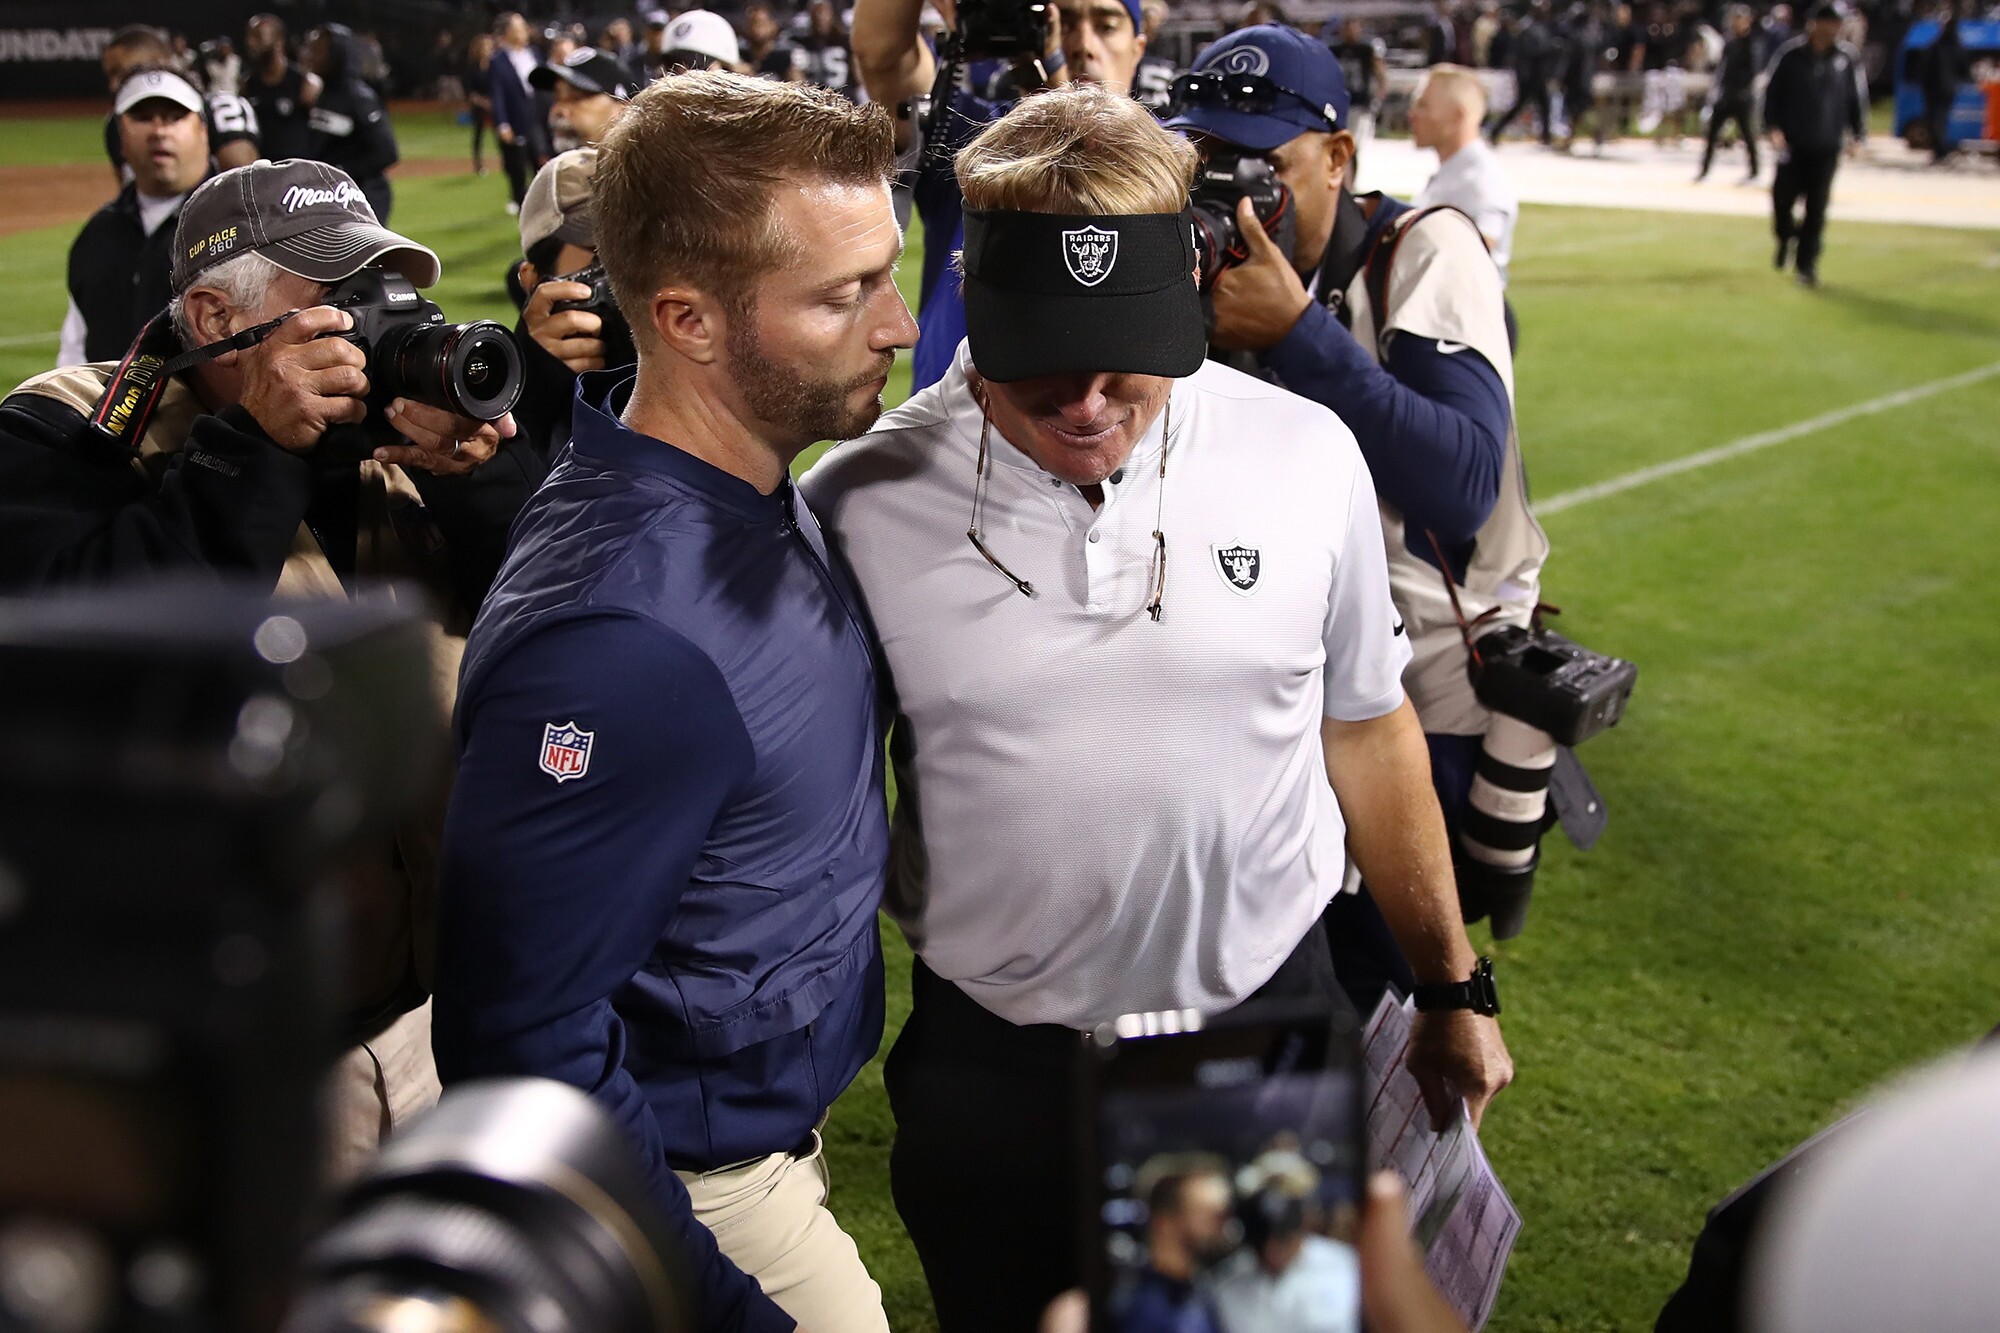 Rams coach Sean McVay and Raiders coach Jon Gruden share a moment on the sideline.